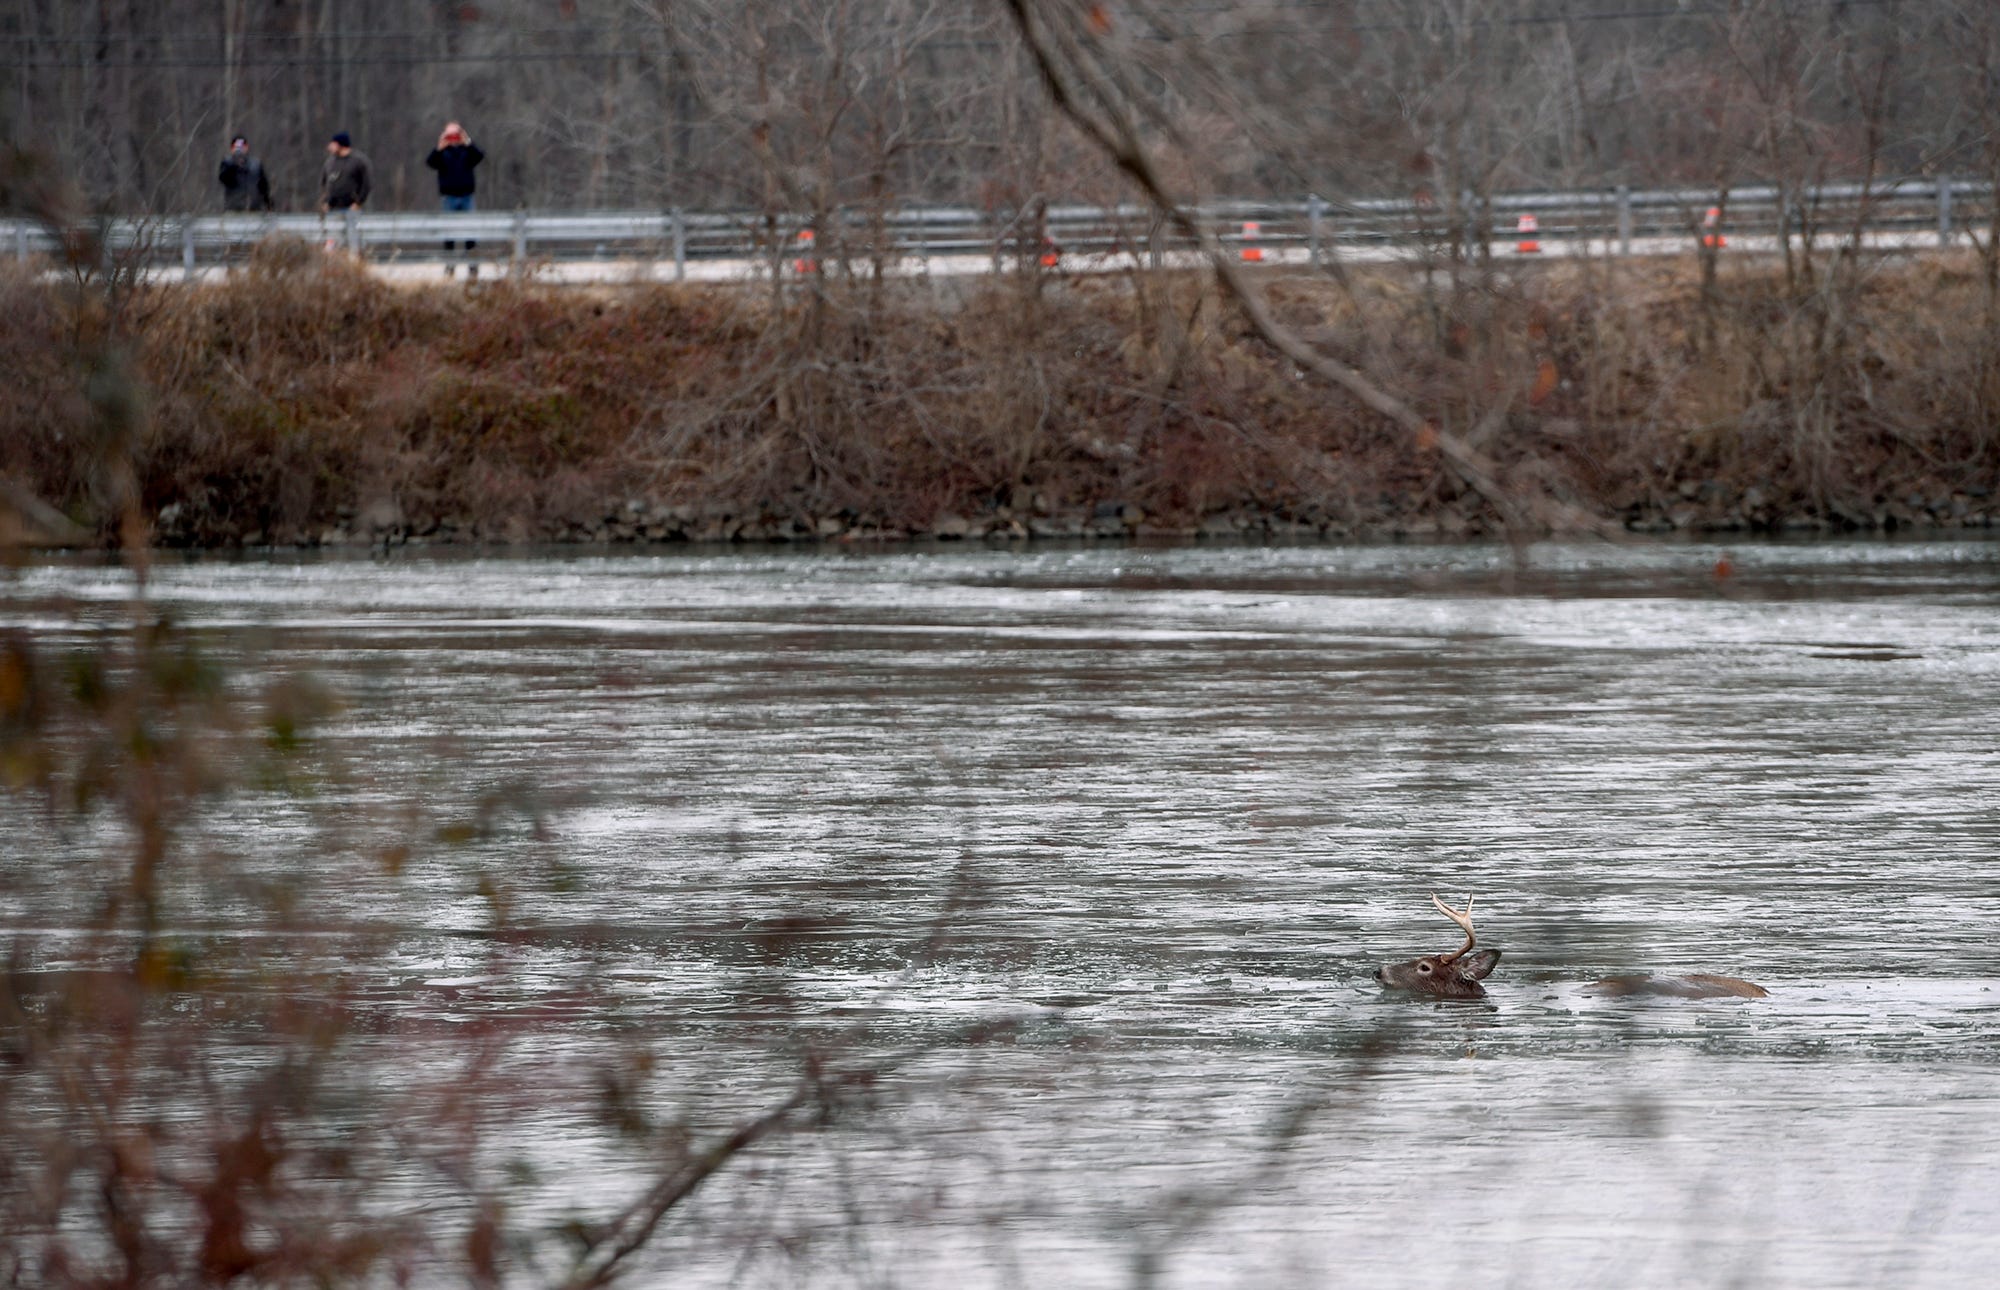 A whitetail buck swims back to shore after falling through the ice at Gifford Pinchot State Park, Saturday, January 11, 2019. Park officials wearing special ice rescue dry suits,  broke up the ice creating a path for the two deer eventually swim to shore.
John A. Pavoncello photo